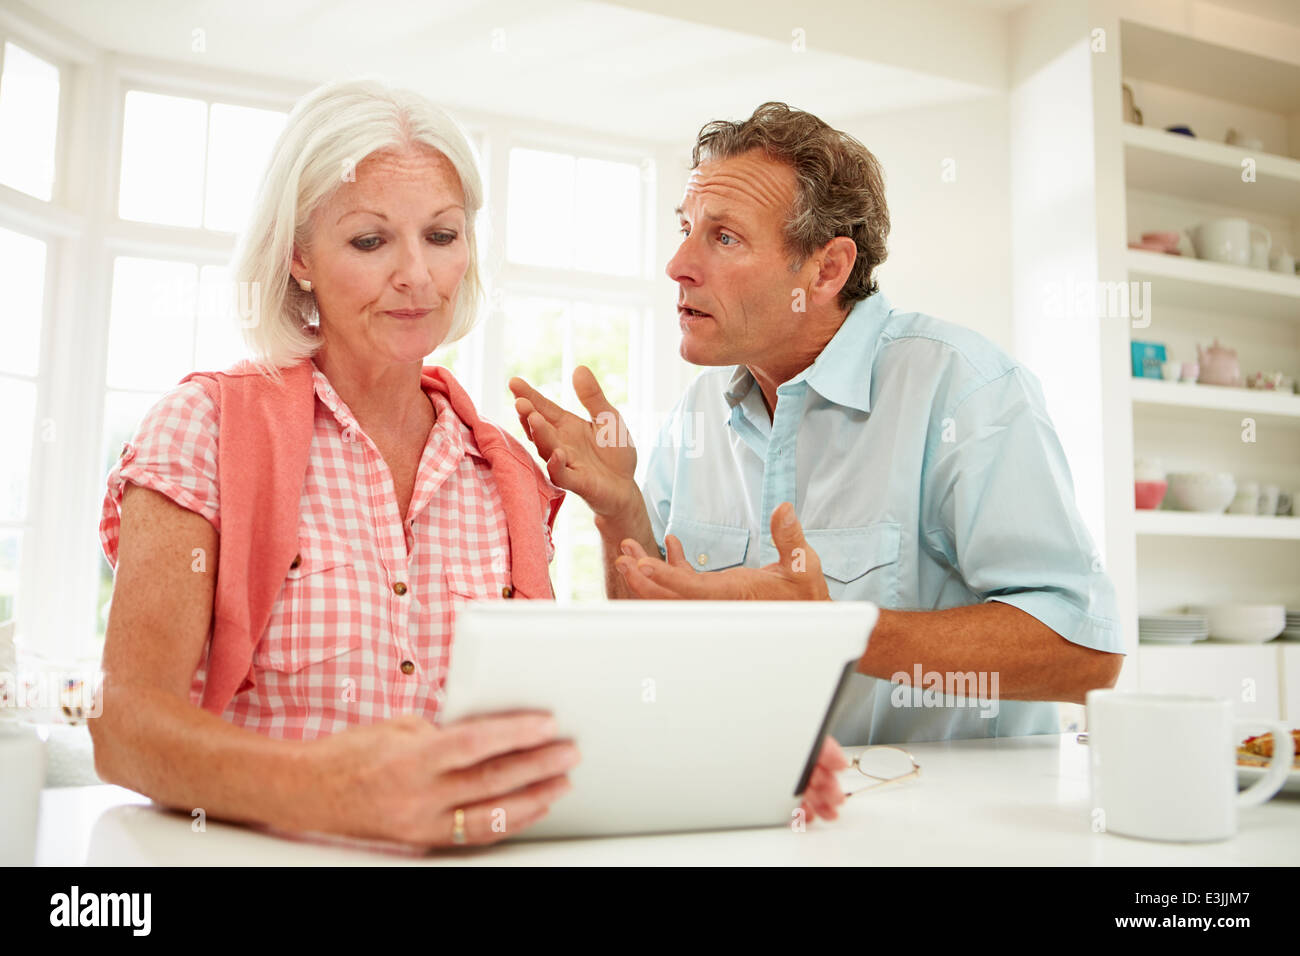 Worried Middle Aged Couple Looking At Digital Tablet Stock Photo